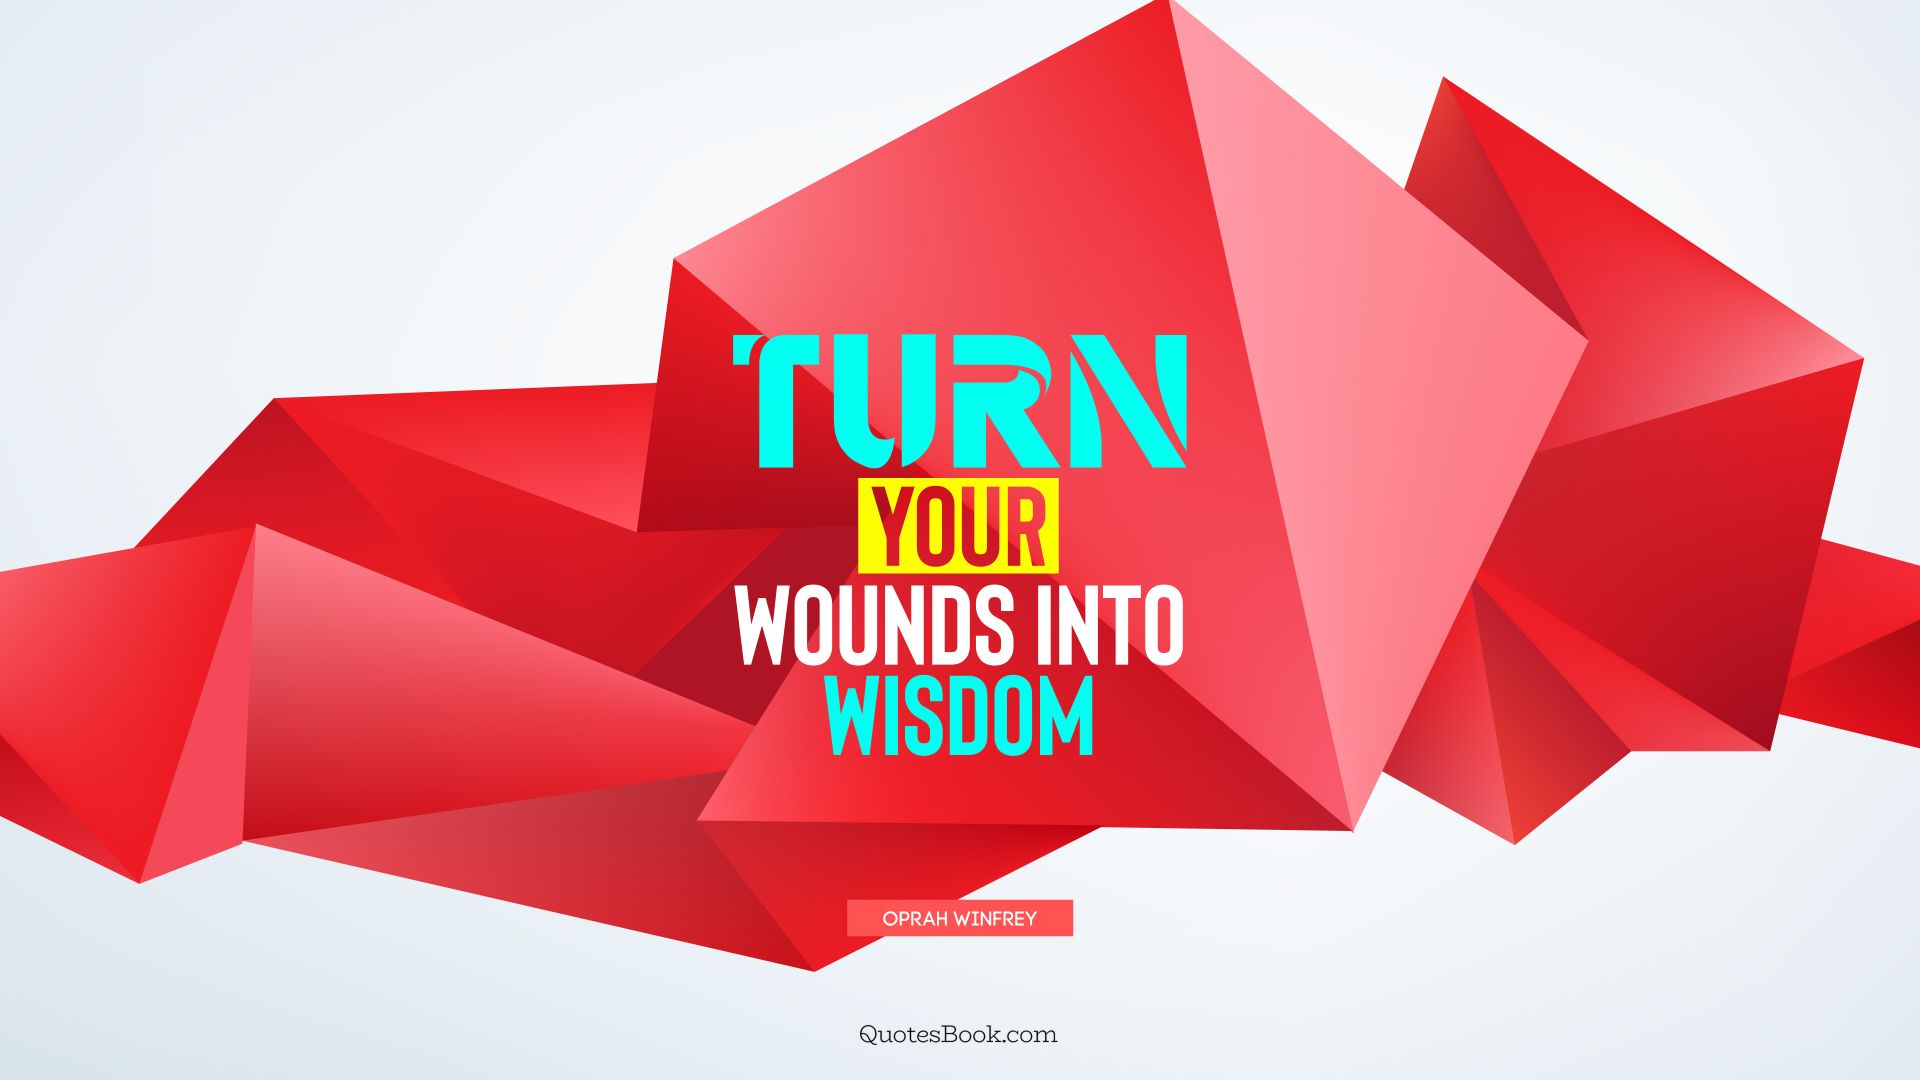 Turn your wounds into wisdom. - Quote by Oprah Winfrey